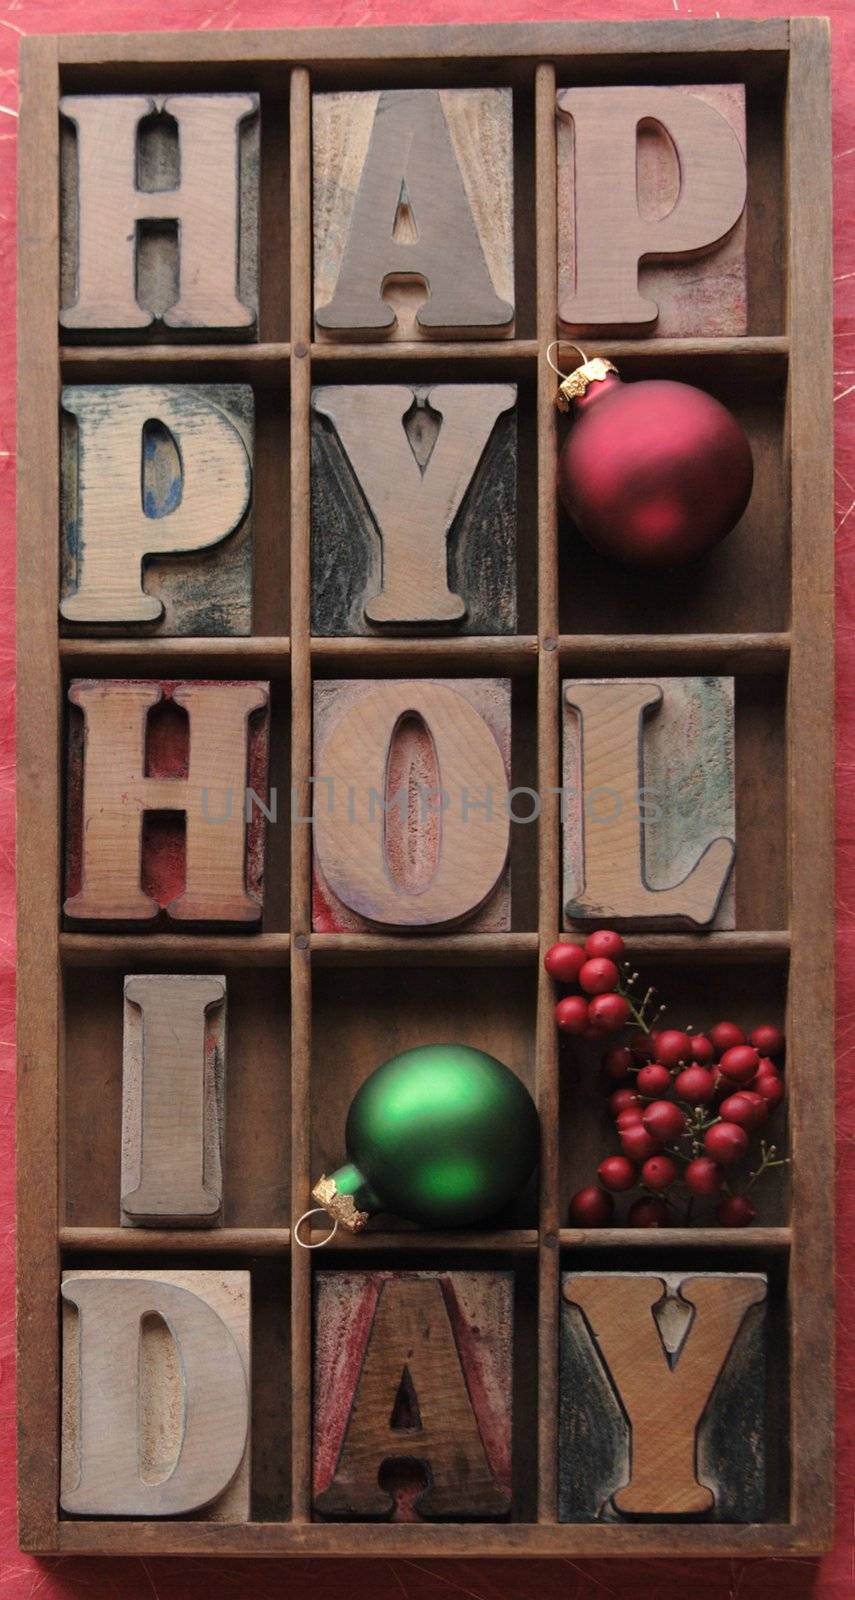 happy holiday in old wood letters in a type case with ornaments and berries